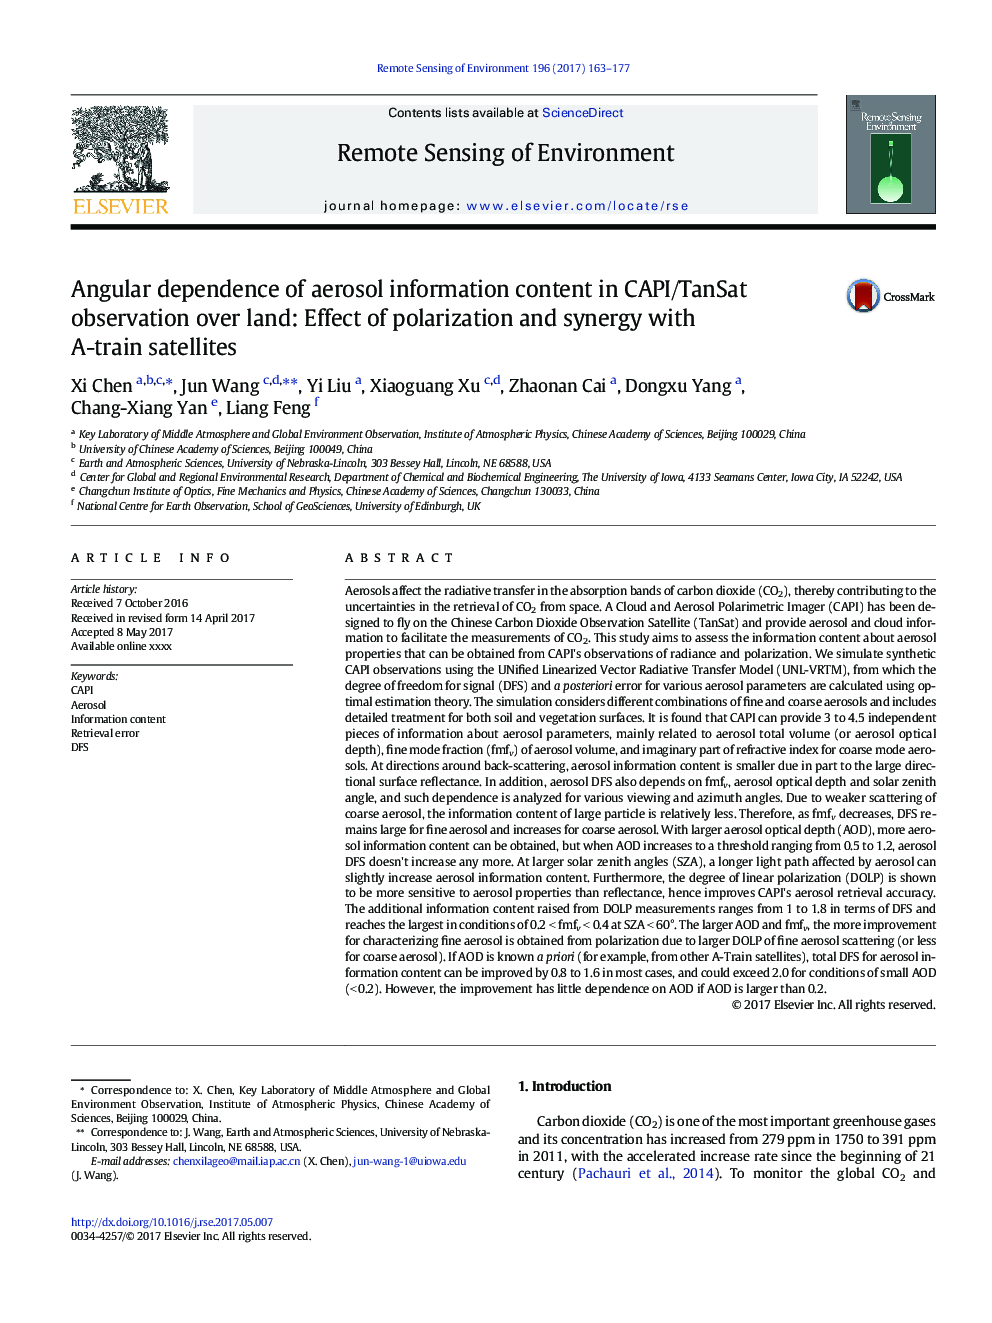 Angular dependence of aerosol information content in CAPI/TanSat observation over land: Effect of polarization and synergy with A-train satellites